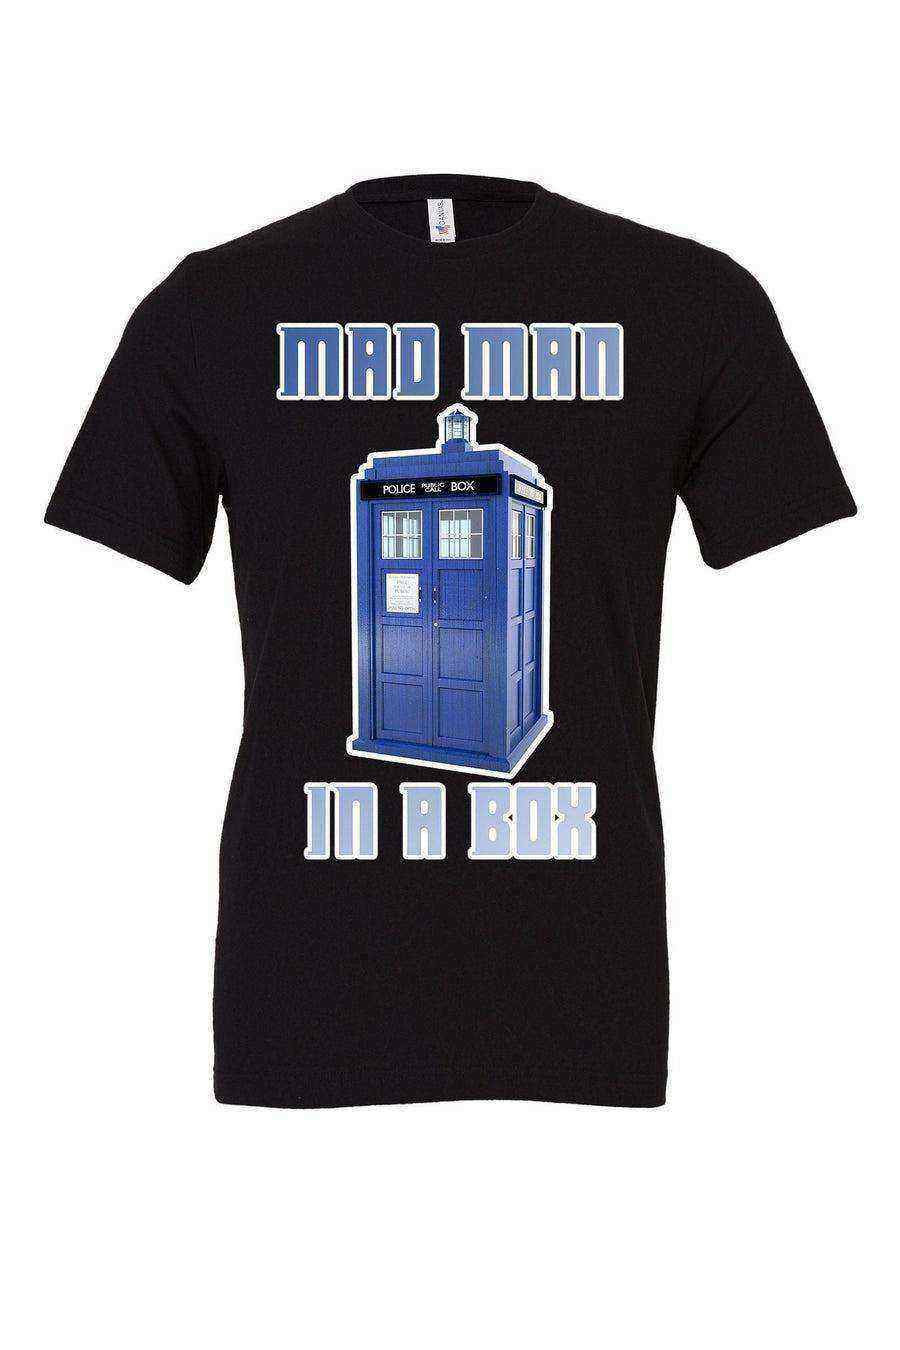 Youth | Doctor Who Shirt | Mad Man In A Box - Dylan's Tees